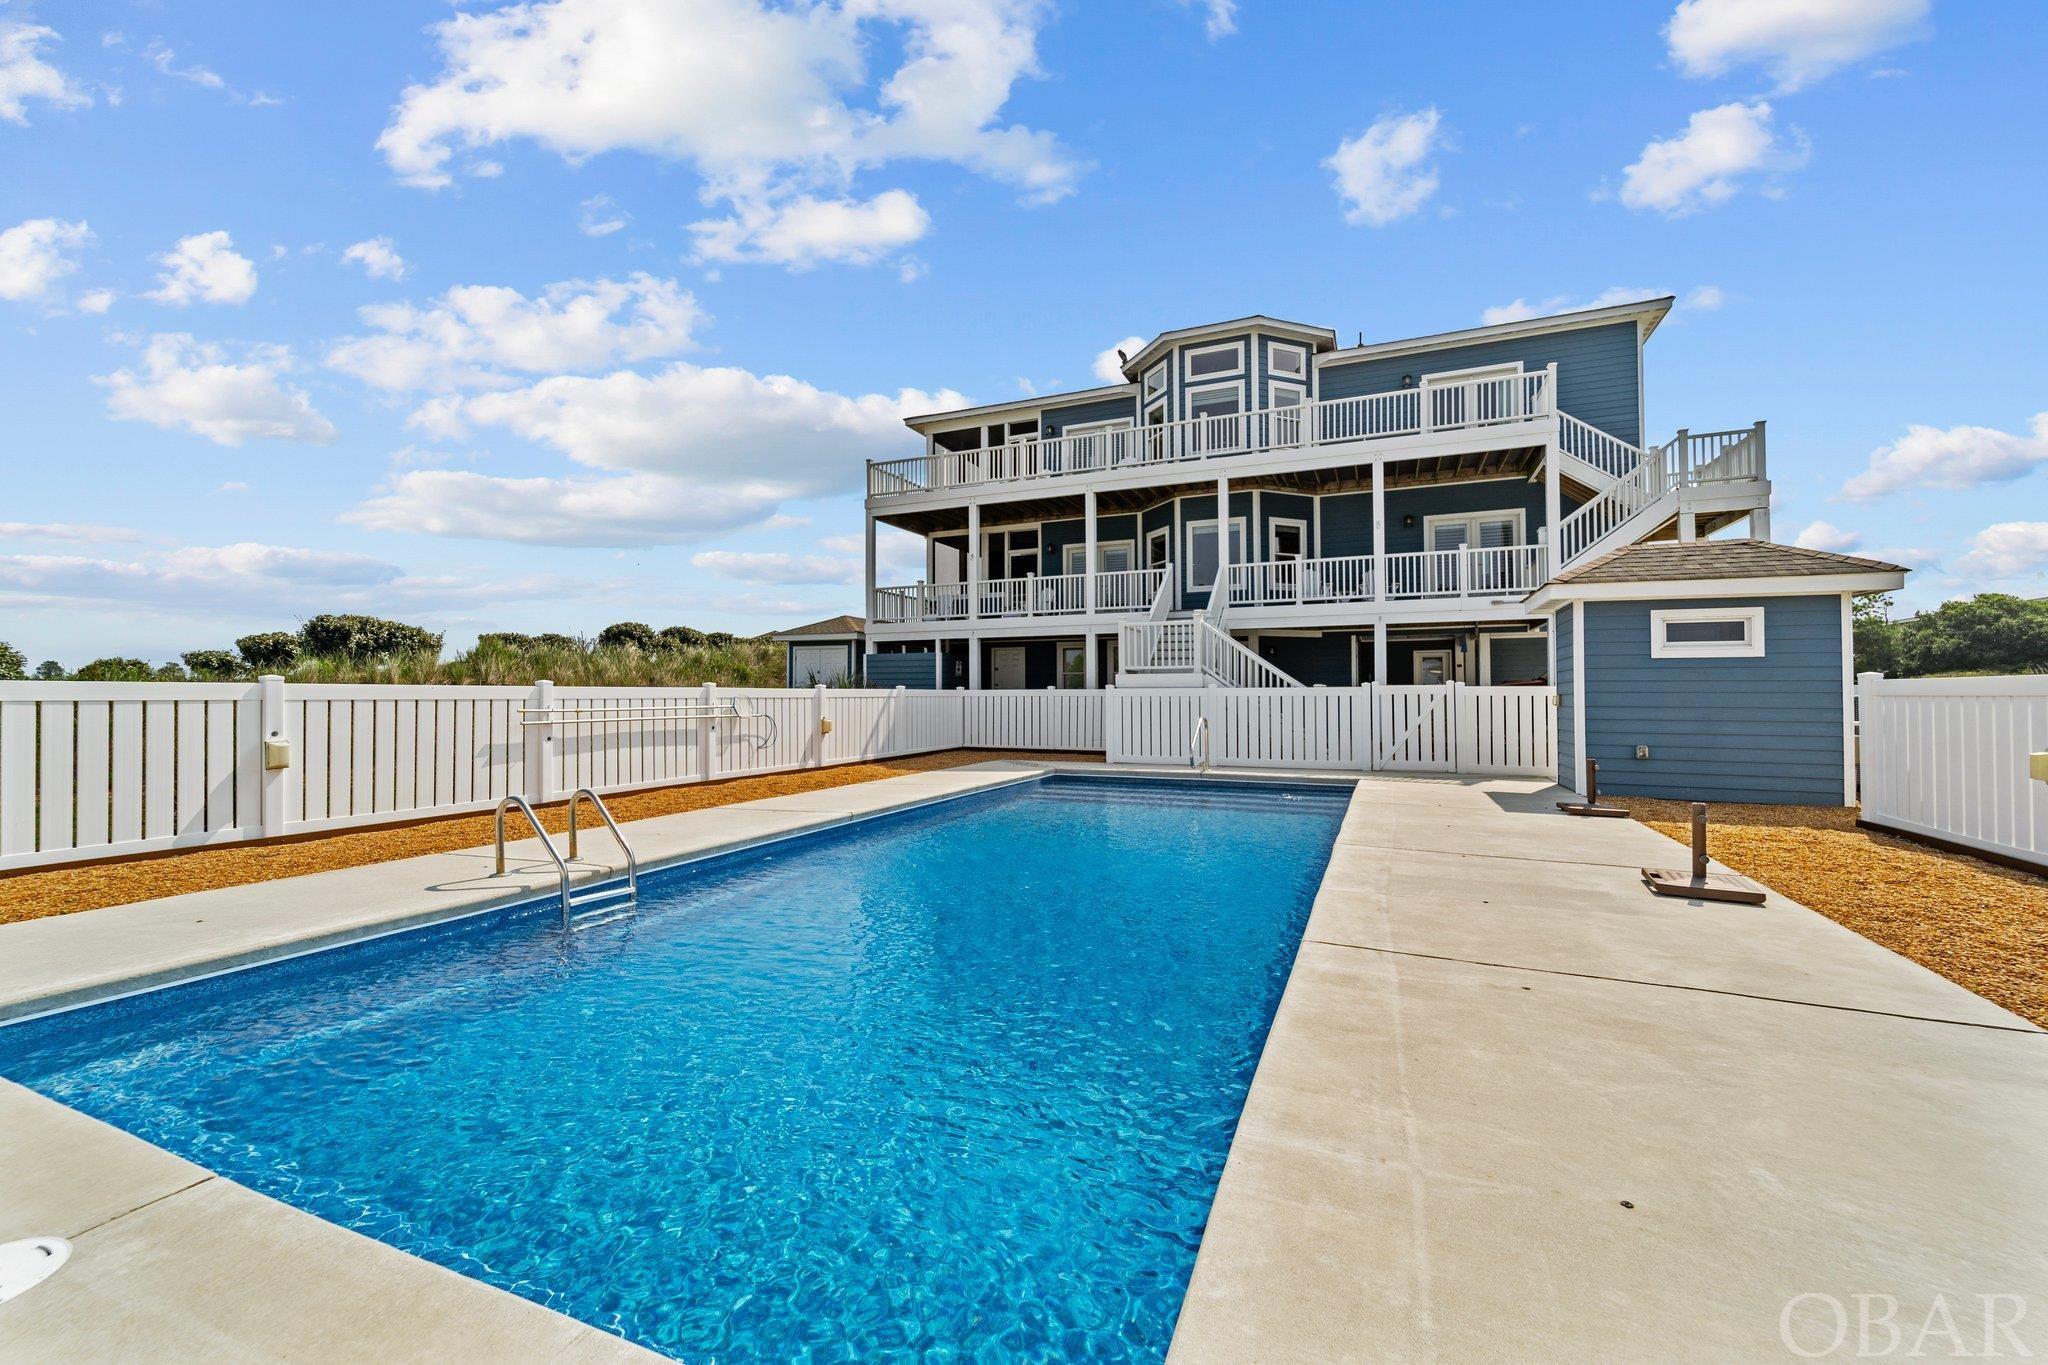 Always wanted to live on a golf course AND have panoramic Ocean AND golf course views? Pack your clubs, 303 Grissom Street in Kitty Hawk is the home for you. This 4,877sf home constructed in 2018 by Stan White Construction sits on a 20000sf lot in an X Flood zone lot and boasts a fenced in 16x38 lit saltwater pool with exquisite Ocean views. Beautifully landscaped and located on the 11th green. Exterior composite decking on all sides, East decks lead to every level of the home.    The lower level consists of a spacious area that can be used as a theater room or an entertainment/recreational room fully equipped wet bar, half bath with outside pool entry door. Off this area is the laundry area and 2 large bedrooms with a shared bathroom with tiled walk-in shower.      As you approach the second level hallway, there is a walk-in closet with shelving and plenty of storage.  Entering the 2nd level, this living space has a half bath. A fully equipped kitchen with subway backsplash and pantry (which was originally done for an alternate private space) for friends or family staying during the holidays. A dining area with bay windows and access to the screened porch with golf course and ocean views and access to East decking. A primary en-suite with extra-large walk-in tile shower with walk in closet and deck access and another primary bonus room with a tiled shower.    The third level has a full walk-in closet at entry and as you enter the main living area you have a fully equipped kitchen with a pantry and access to another screened porch off the living area. An en-suite with extra-large walk-in tile shower, a clawfoot tub and a private room with toilet and another primary bonus room with bathroom large tiled shower.    Notable features include elevator, 2 gas fireplaces on mid and upper levels, top of the line fixtures, Atlantic Quartz countertops, extra wide trim/molding around doorways, Levolor custom window treatments, LVT flooring throughout with carpeting on all interior steps.   Concrete walkway throughout the access areas of carport to the fenced in pool and outside shower area. An 8x24 storage building behind the home for even MORE storage. This home has excellent rental potential as an investment property, a lovely main residence or 2nd home.